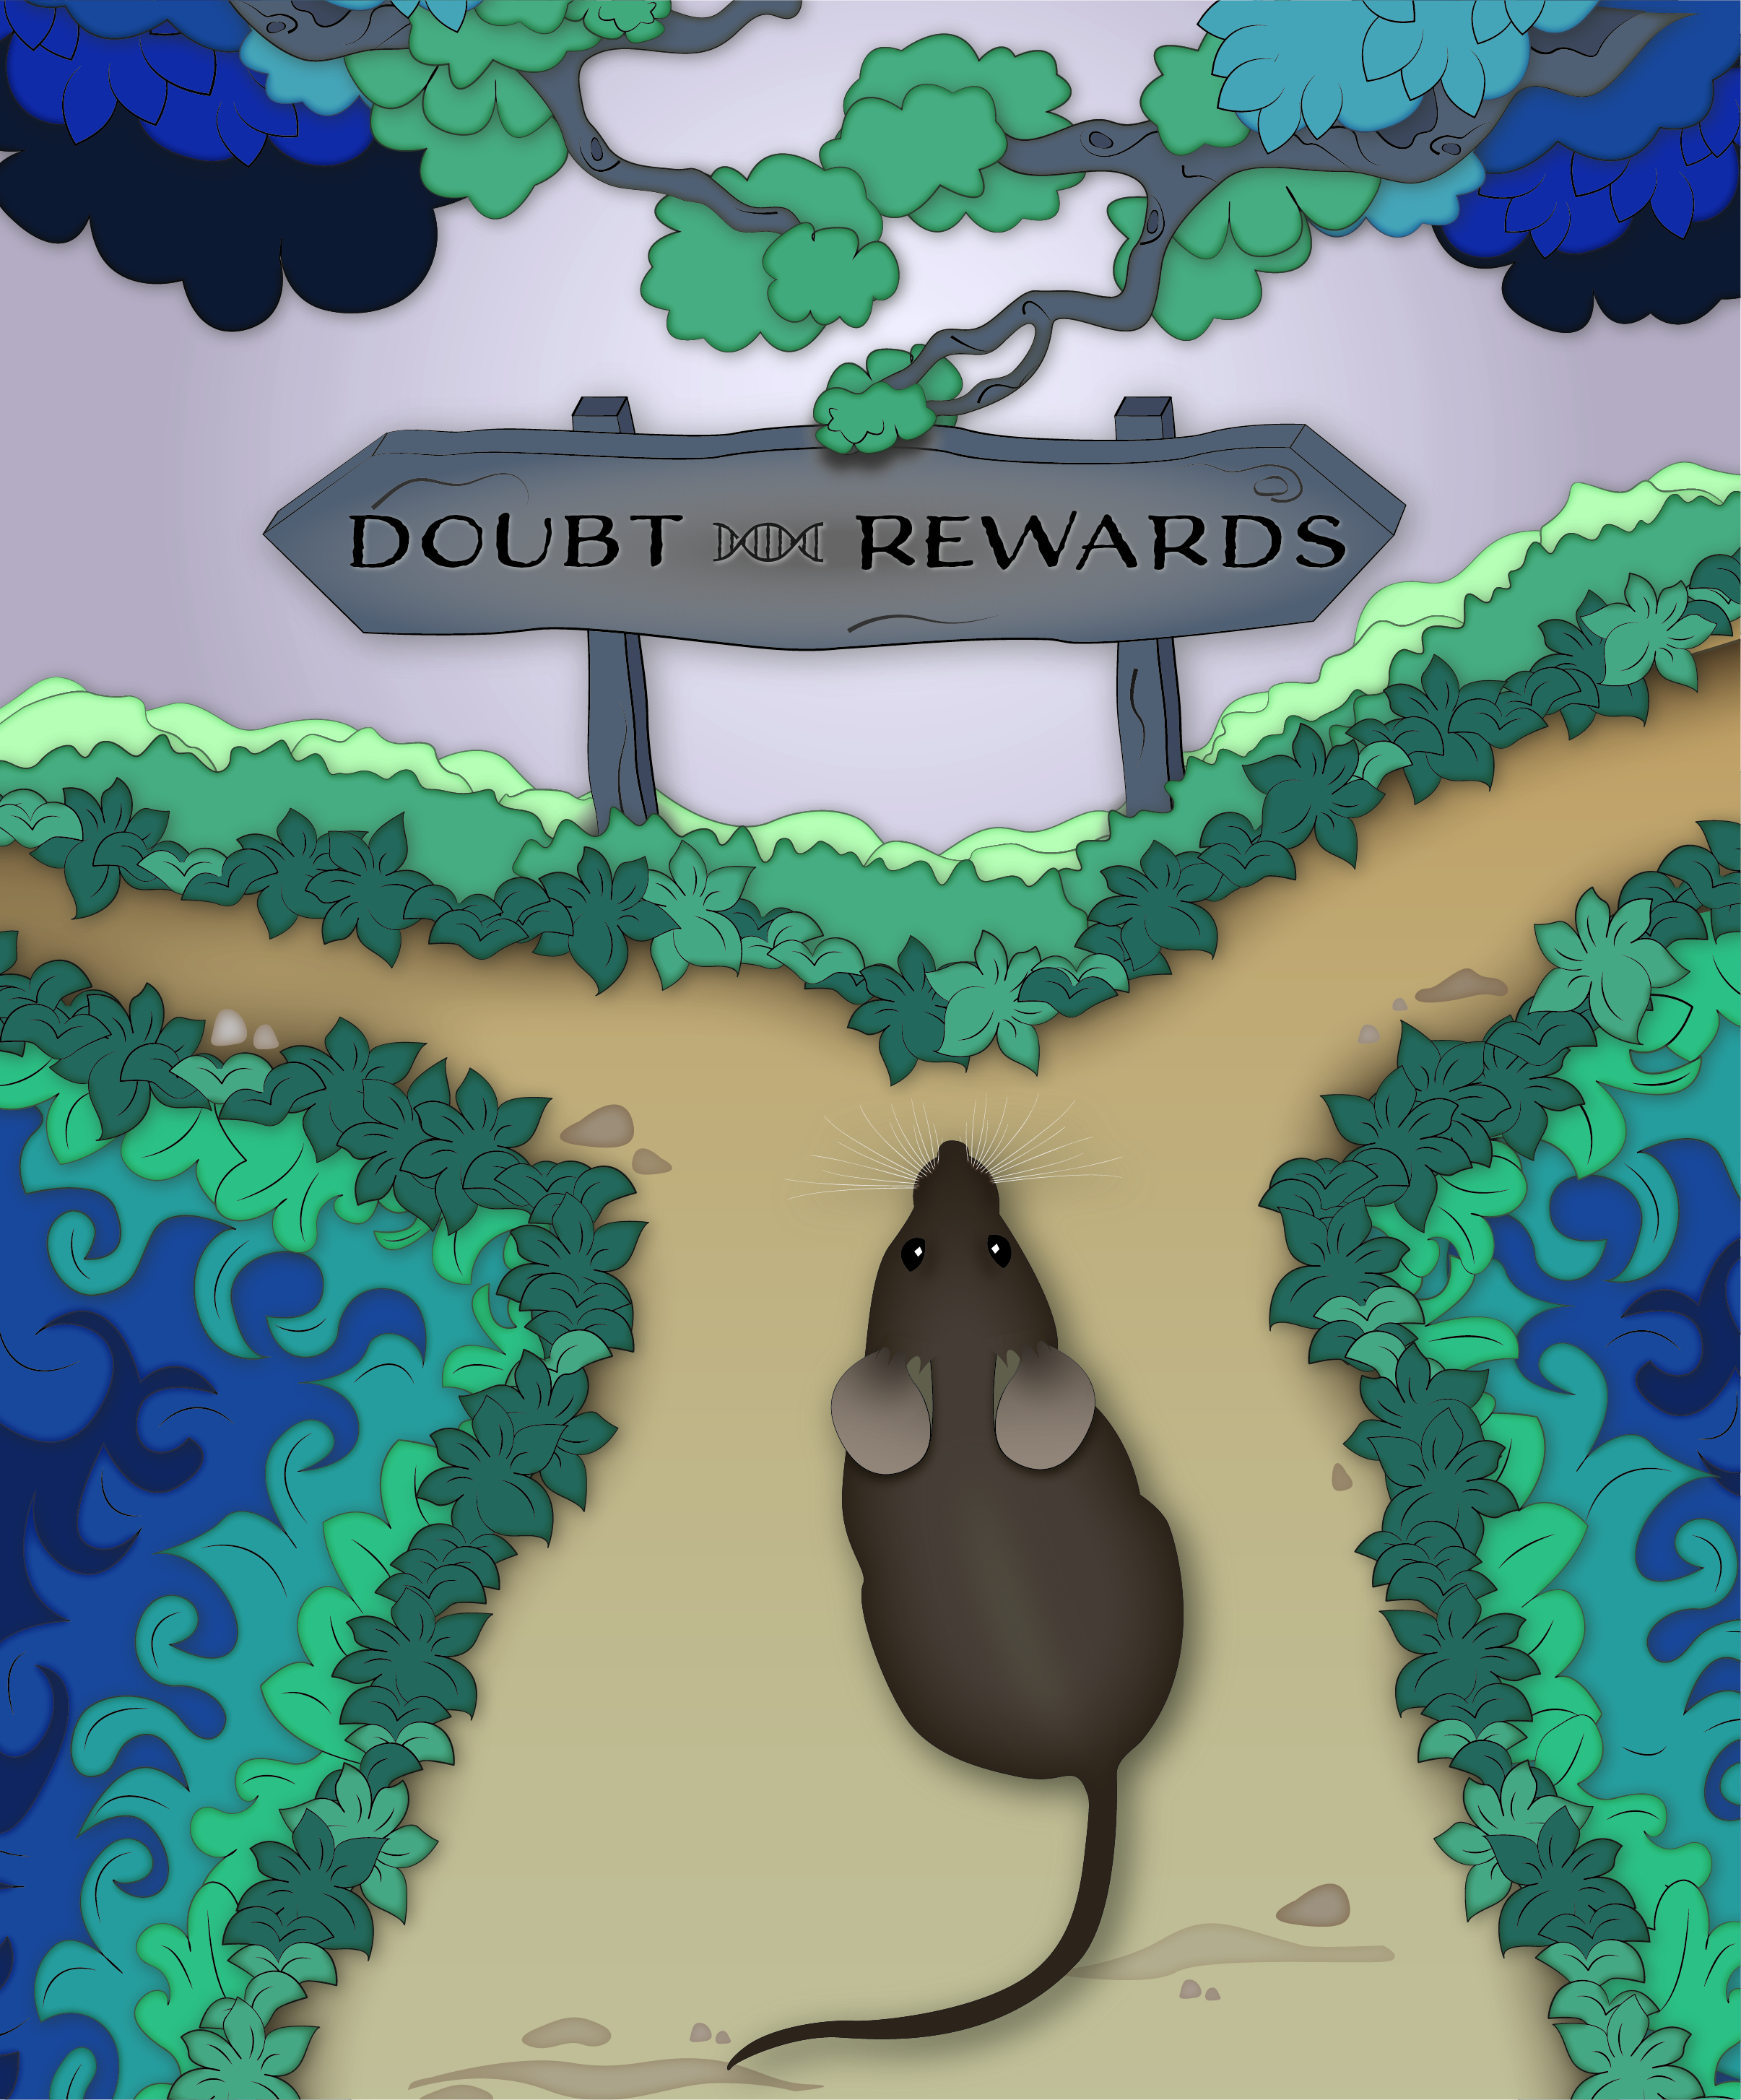 Mouse deciding whether to take the path to "doubt" or the path to "reward."